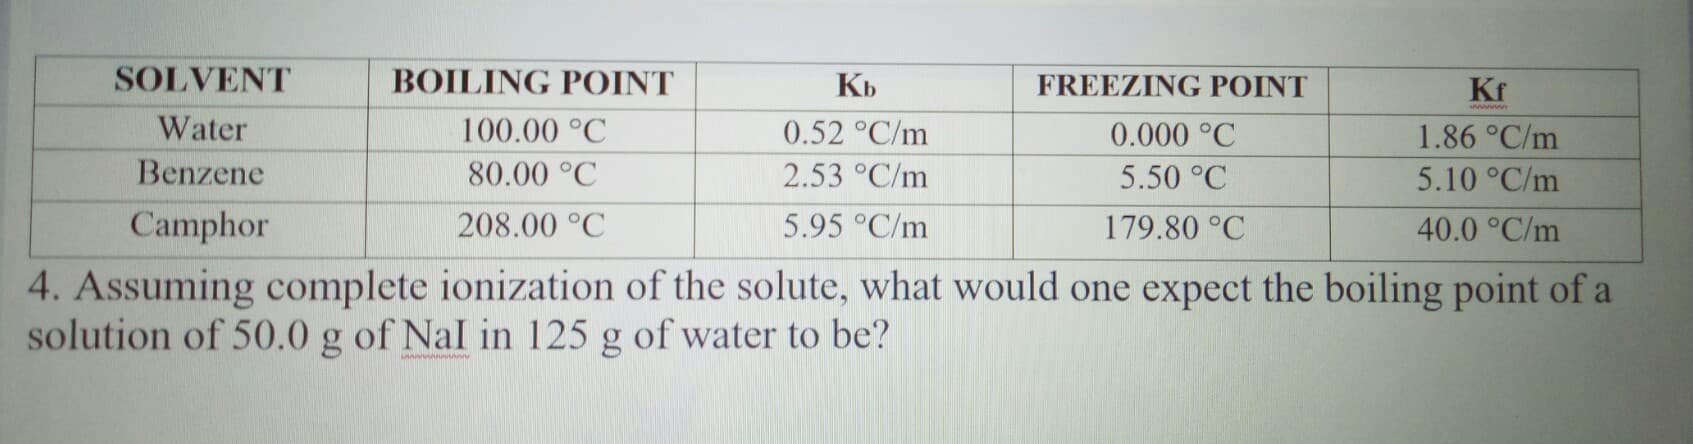 4. Assuming complete ionization of the solute, what would one expect the boiling point of a
solution of 50.0 g of Nal in 125 g of water to be?
